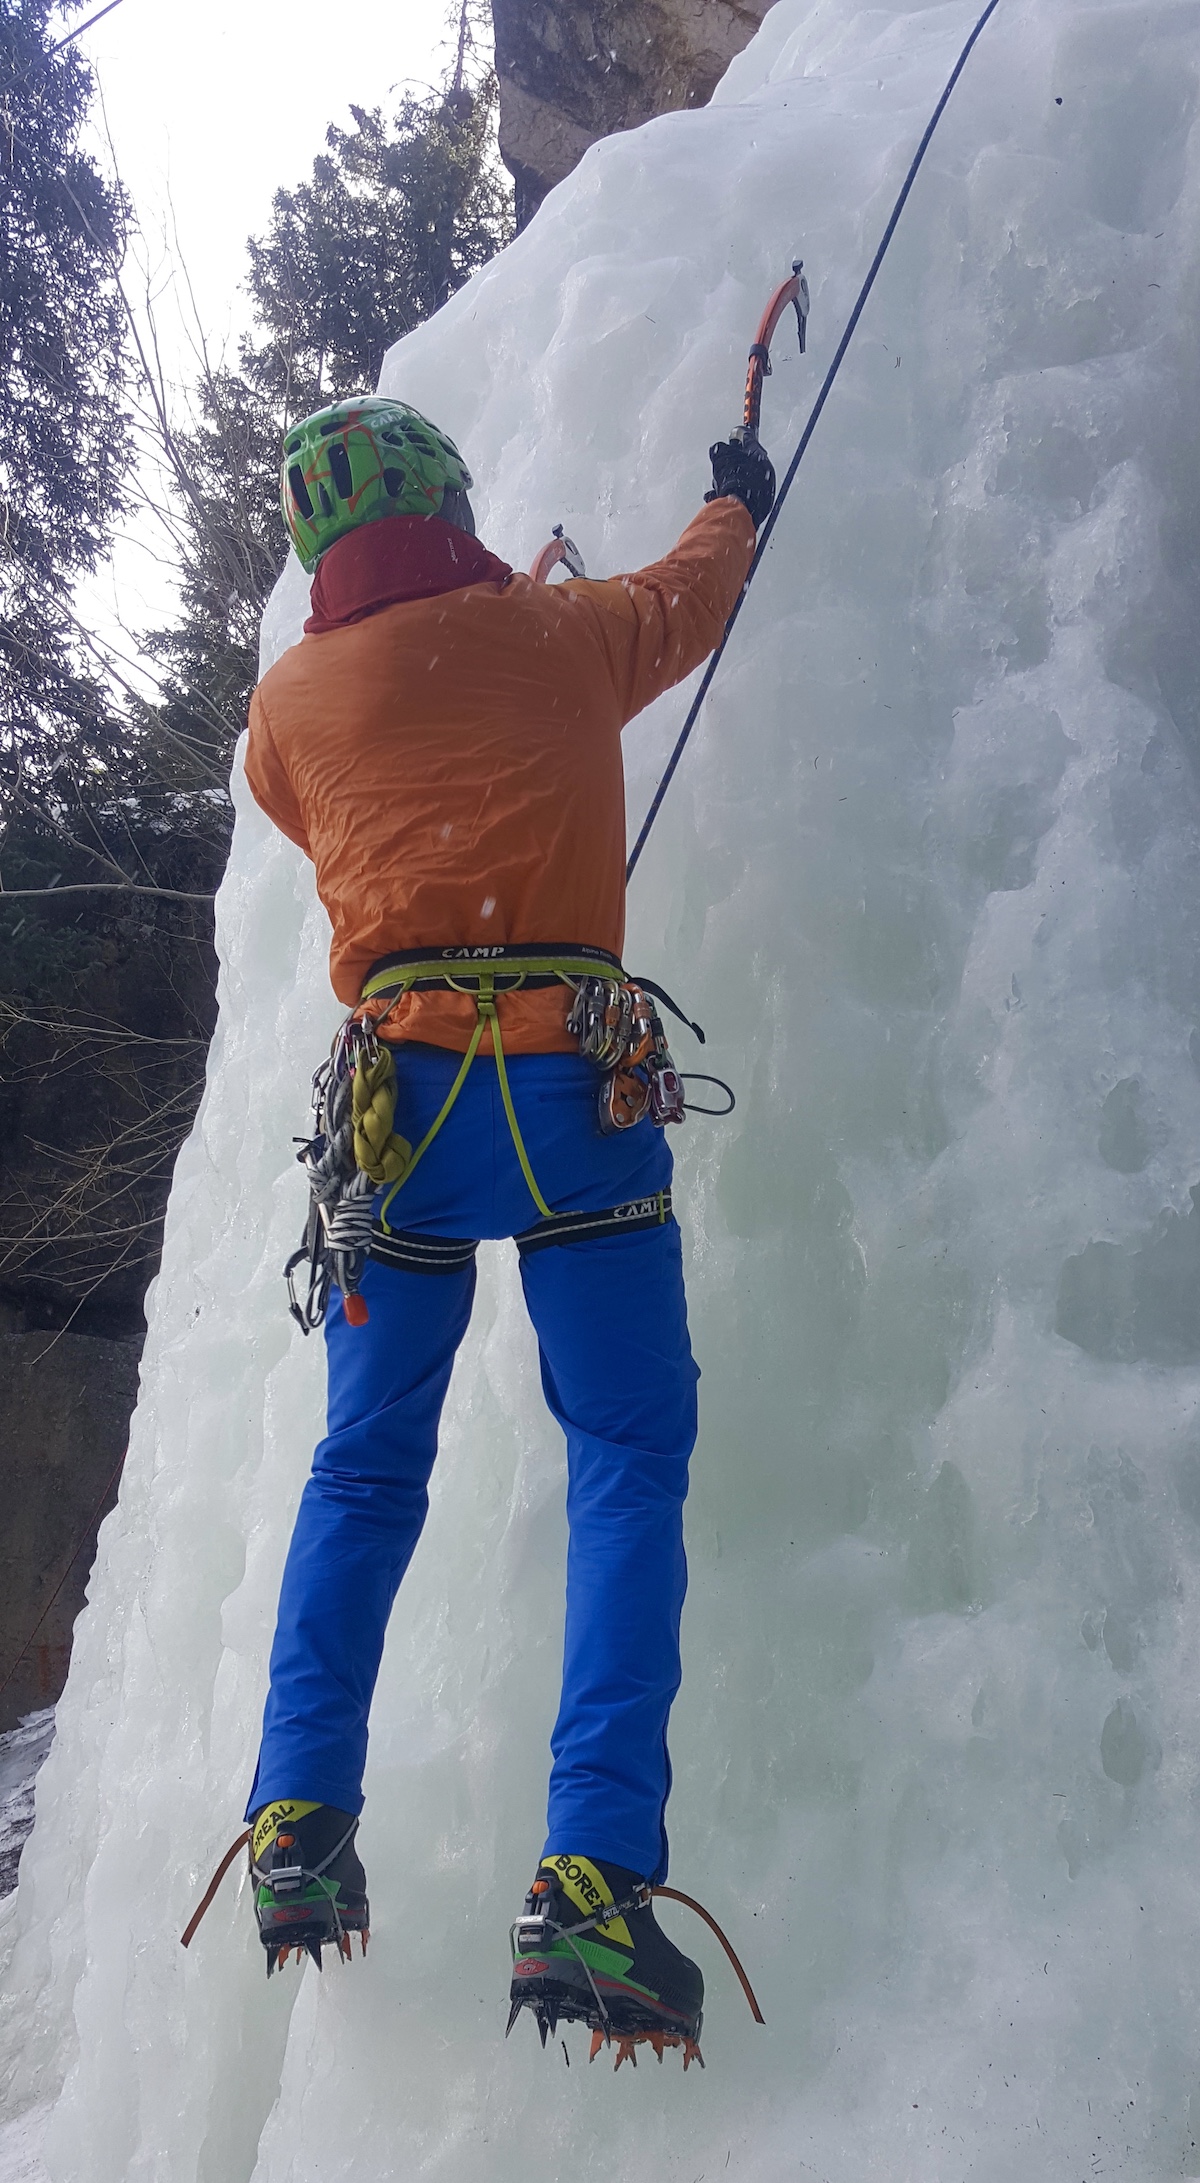 Lewis climbs vertical ice in Rocky Mountain National Park with the Boreal Stetinds. [Photo] Mike Lewis collection